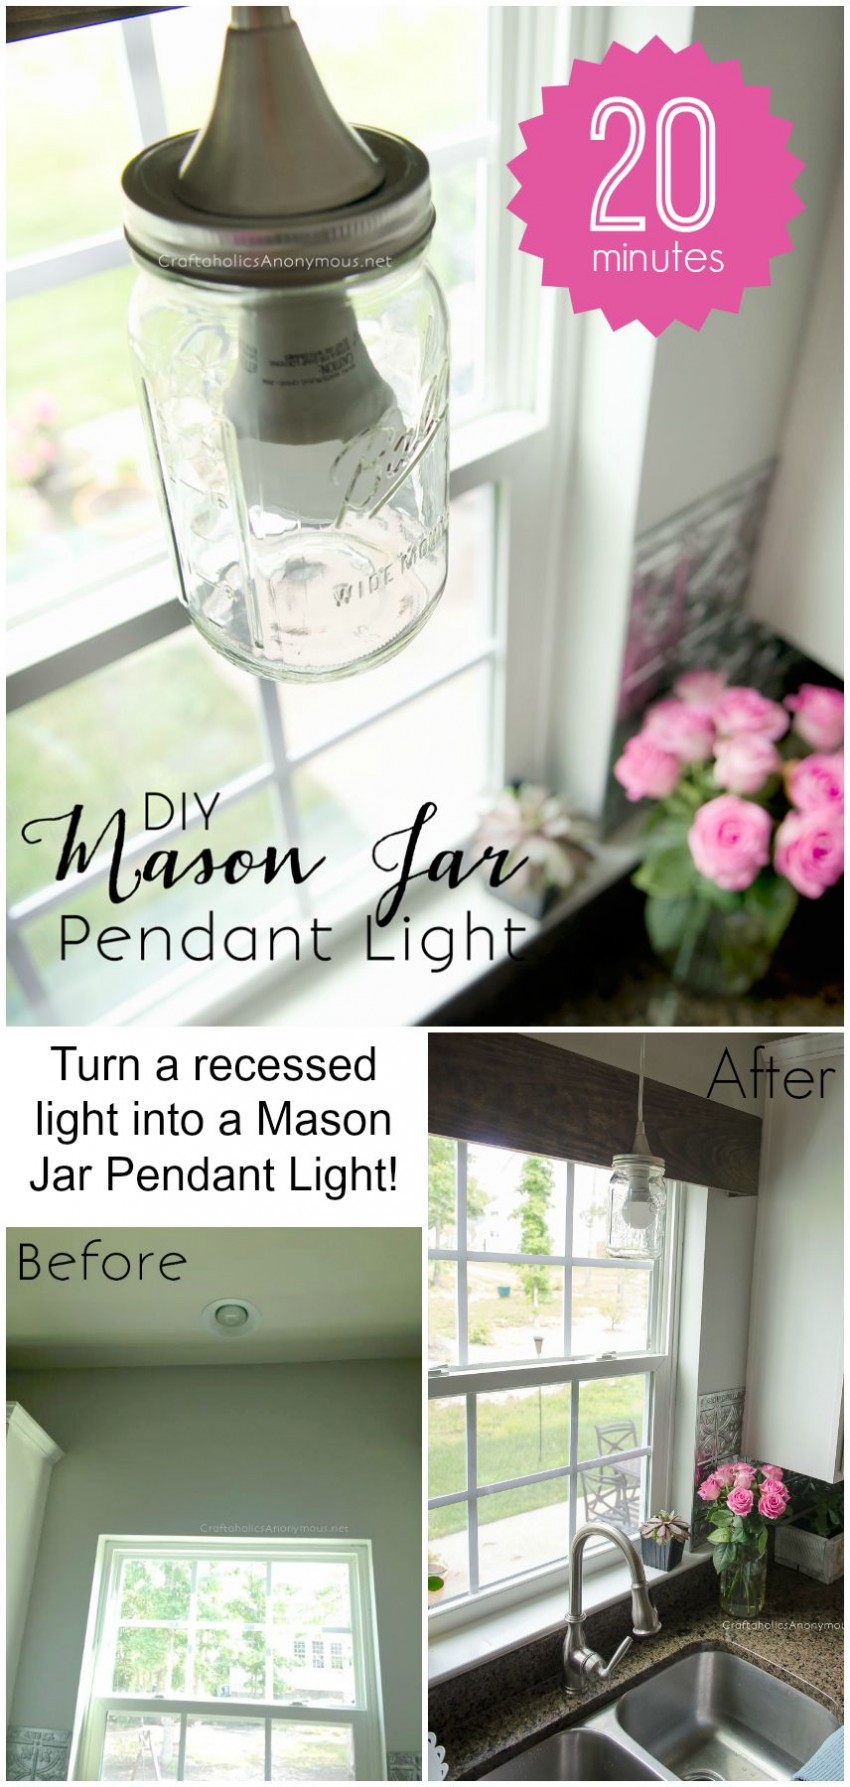 DIY Mason Jar Pendant light :: Super easy way to turn a recessed light into a Mason Jar light for only $20.